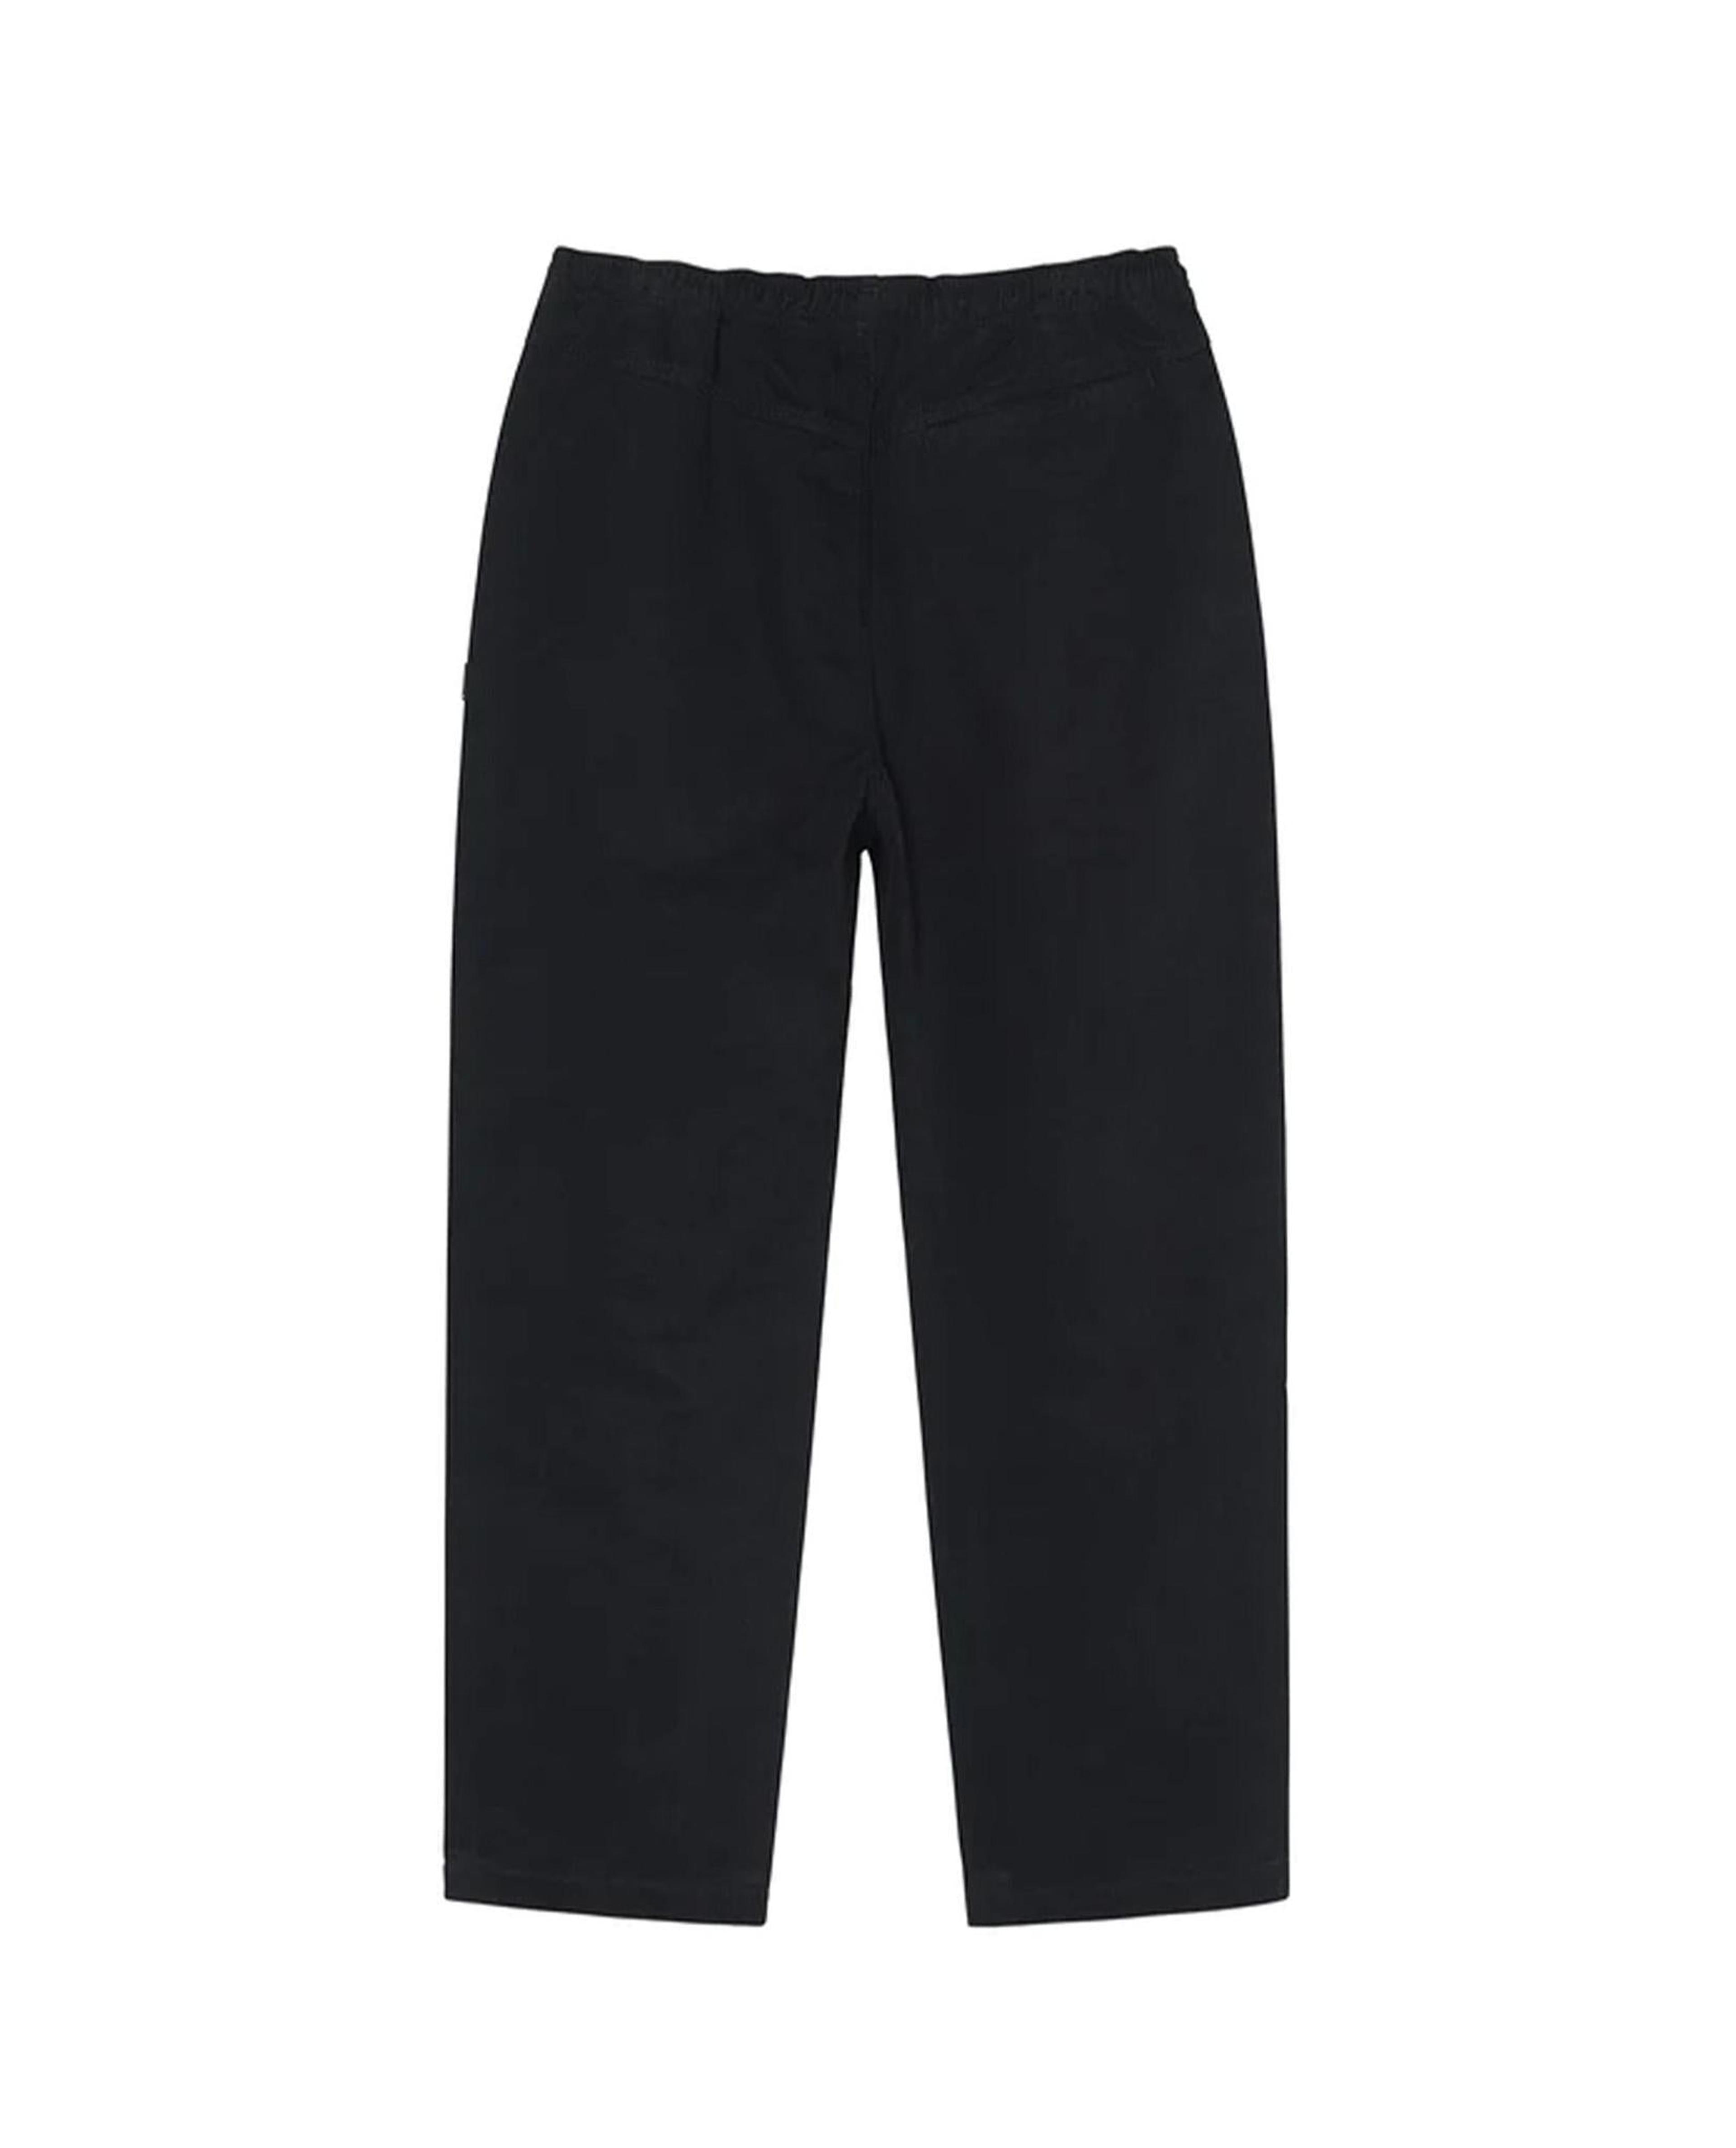 Alternate View 1 of Stussy Brushed Beach Pant